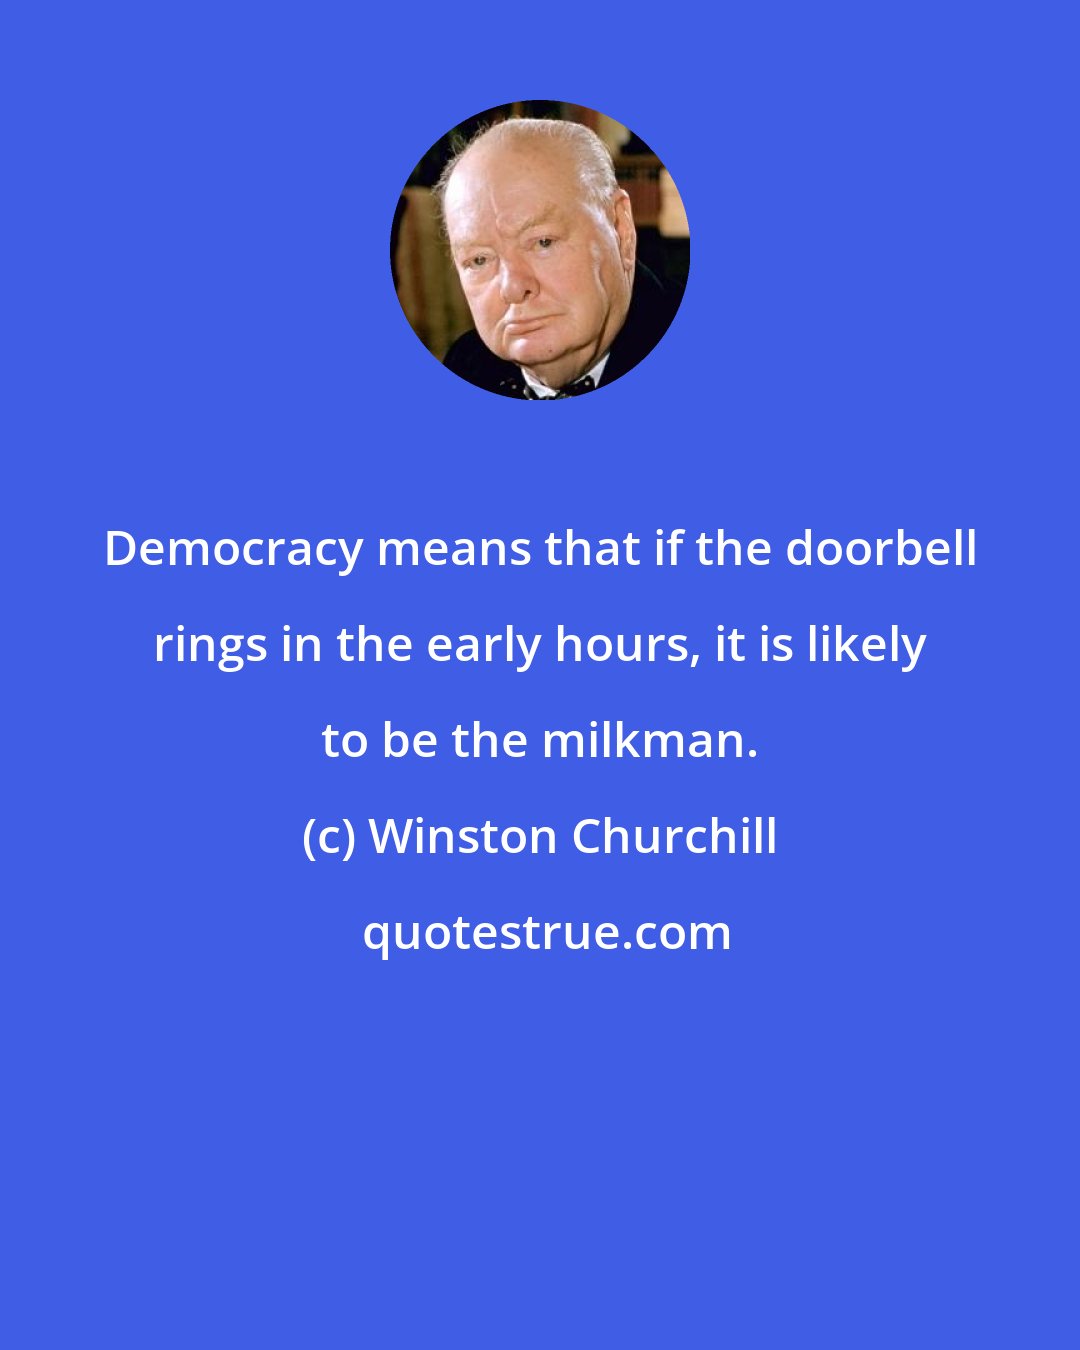 Winston Churchill: Democracy means that if the doorbell rings in the early hours, it is likely to be the milkman.